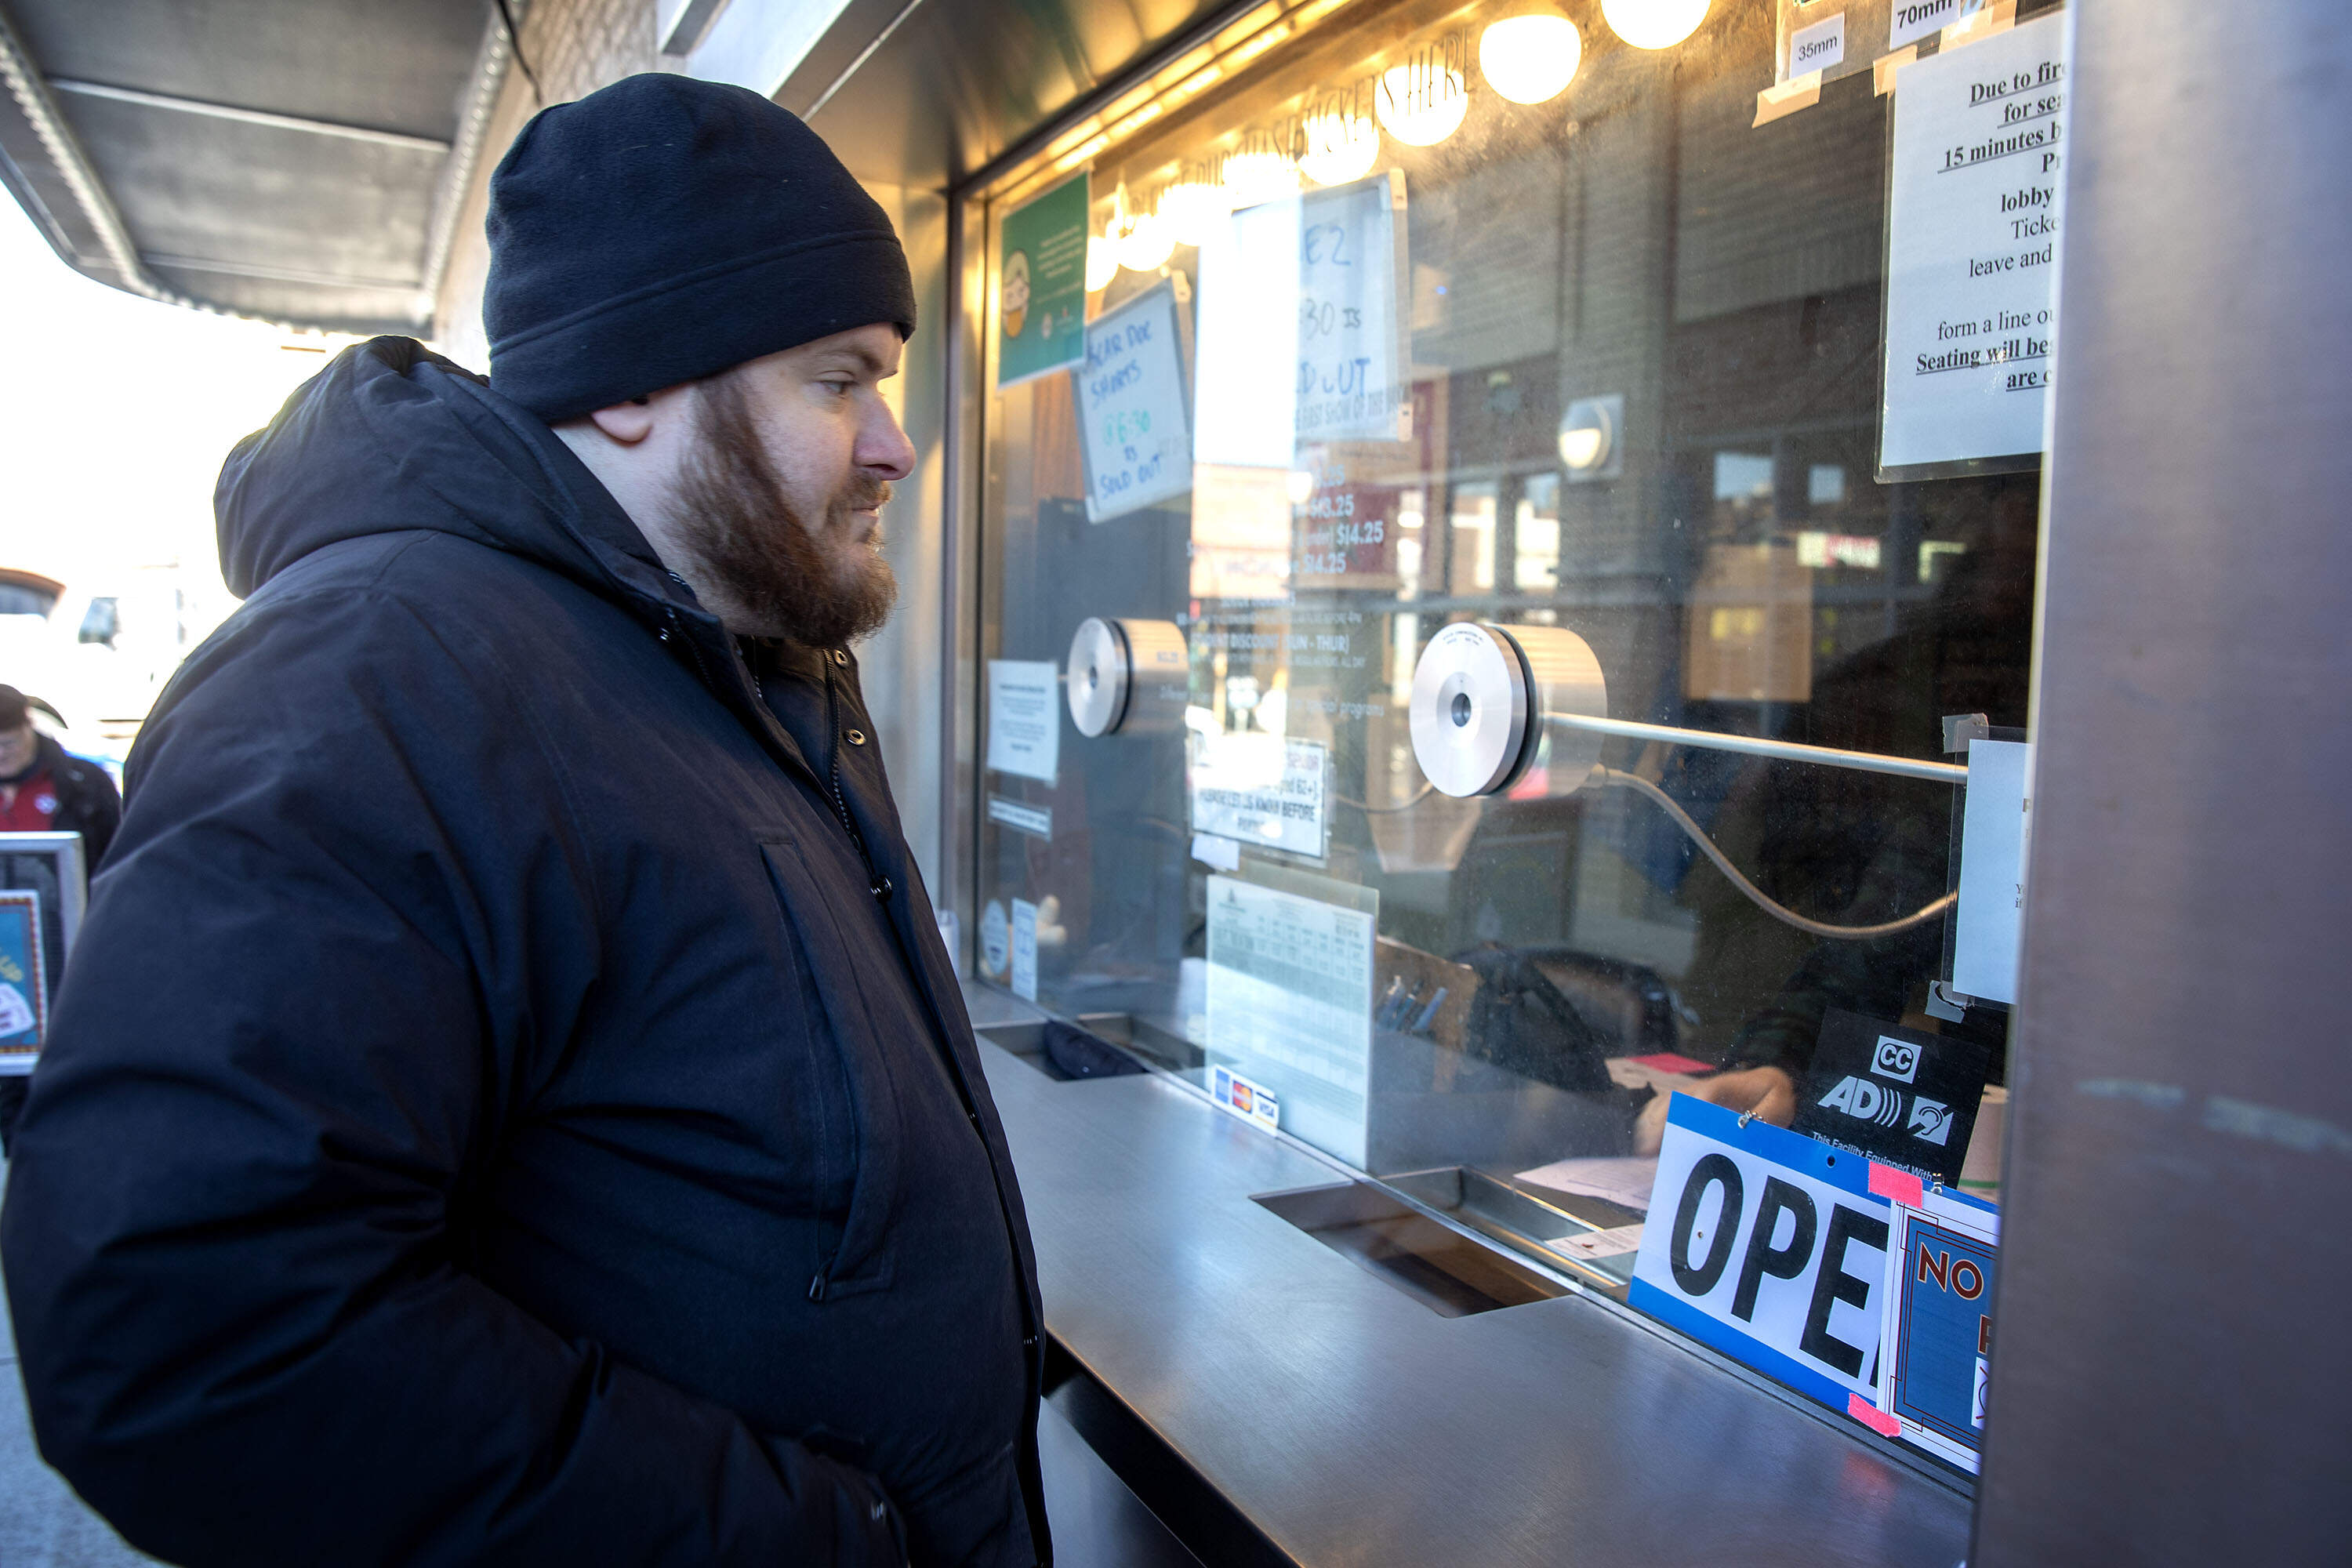 Andrew Bruss waits for his ticket at the old ticket window of The Coolidge Corner Theatre. (Robin Lubbock/WBUR)